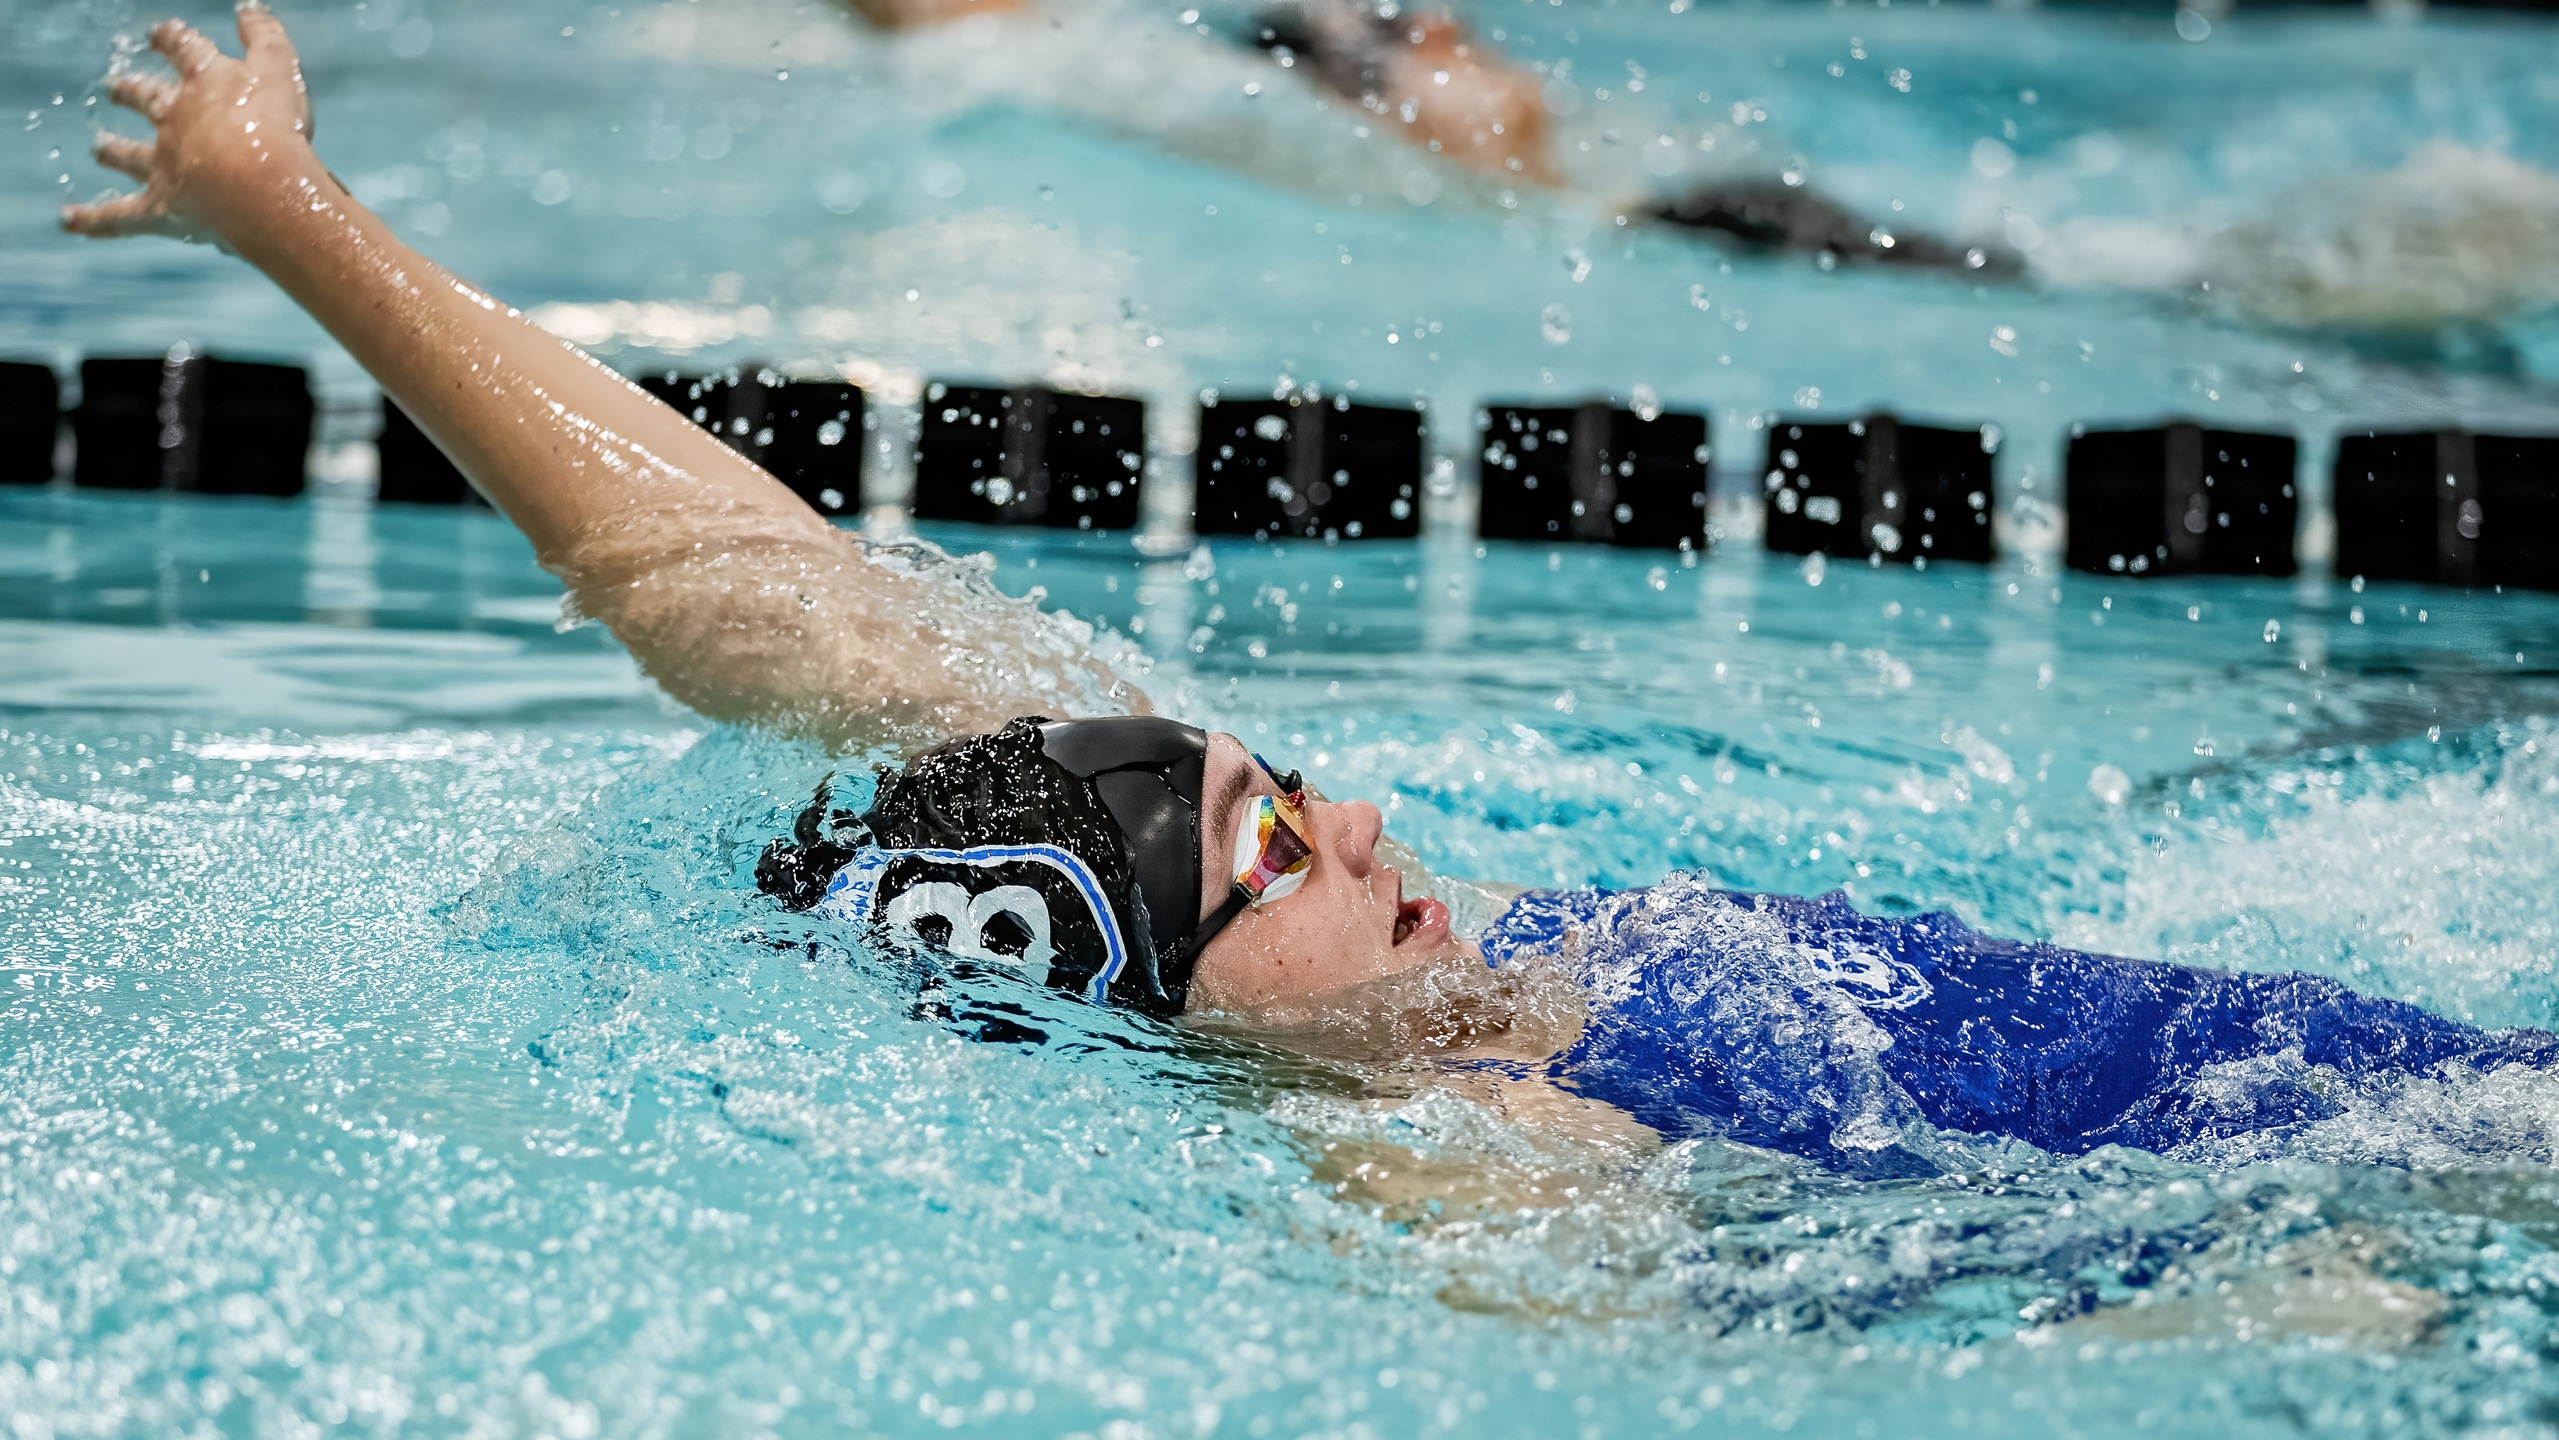 Swimming & Diving Set for Two Home Meets, Including Senior Day on Sunday